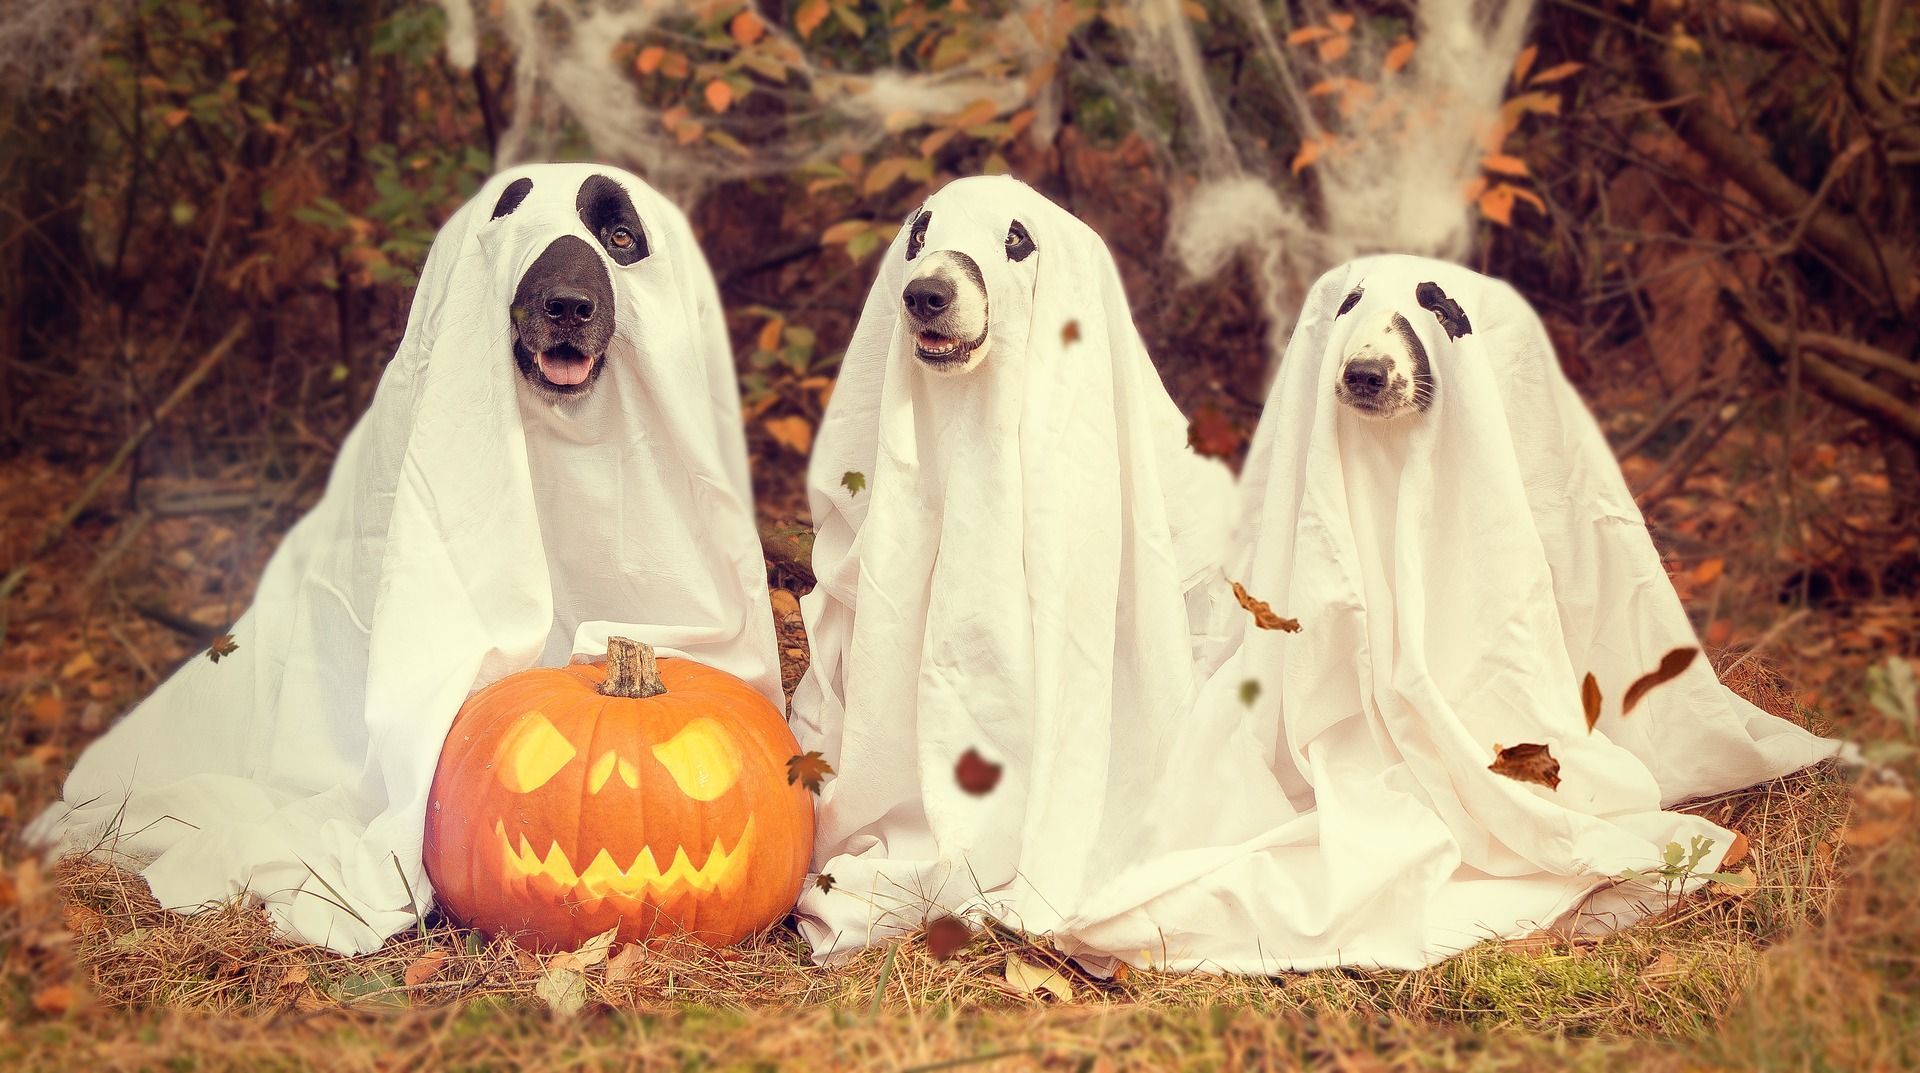 Mobile wallpaper Jacks Lantern Halloween Dog Bringing Holiday  Reduction Web Holidays 105032 download the picture for free